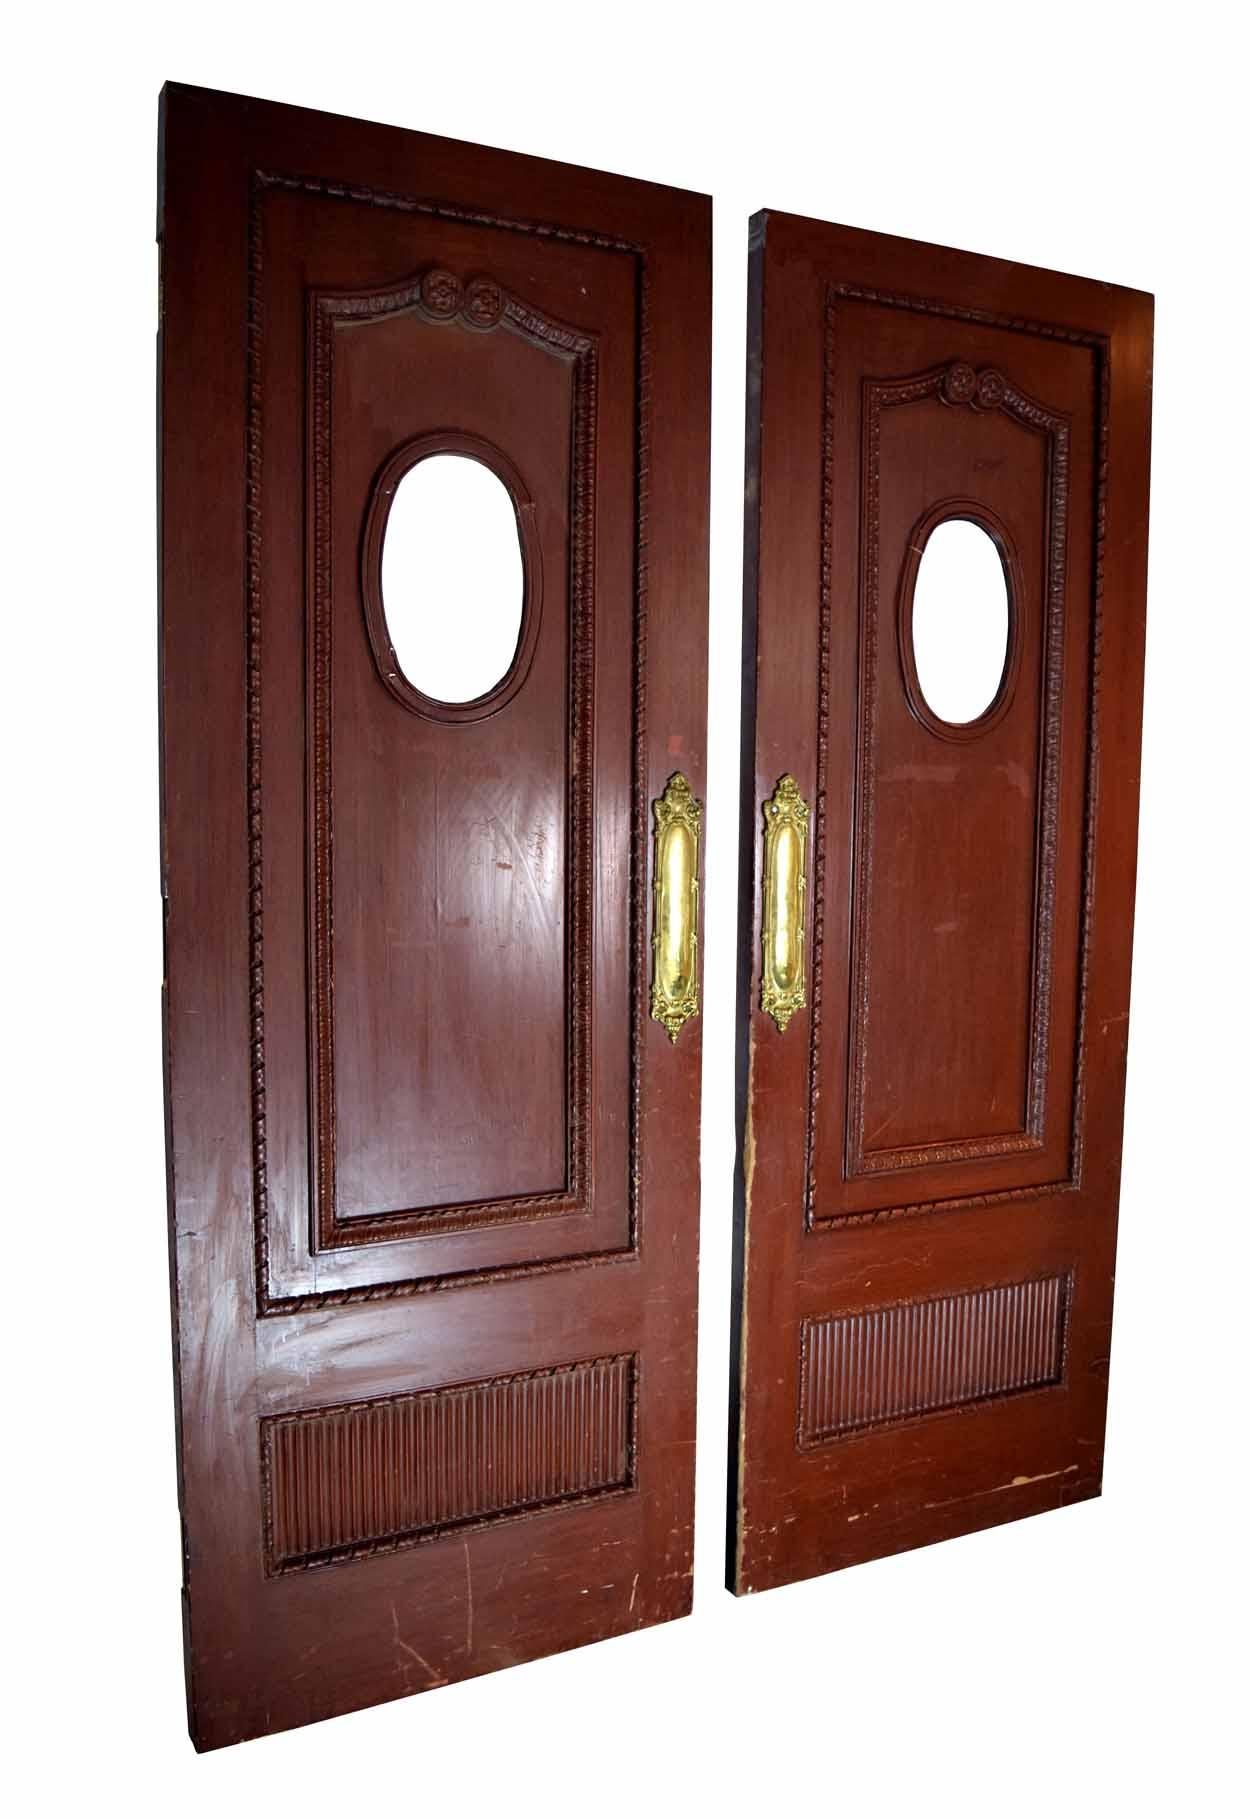 These Victorian double doors feature intricately carved details that add charm and visual interest. The details are reminiscent of nature, with floral carvings above the oval windows, and leaf-like carvings creating panels within the doors. These